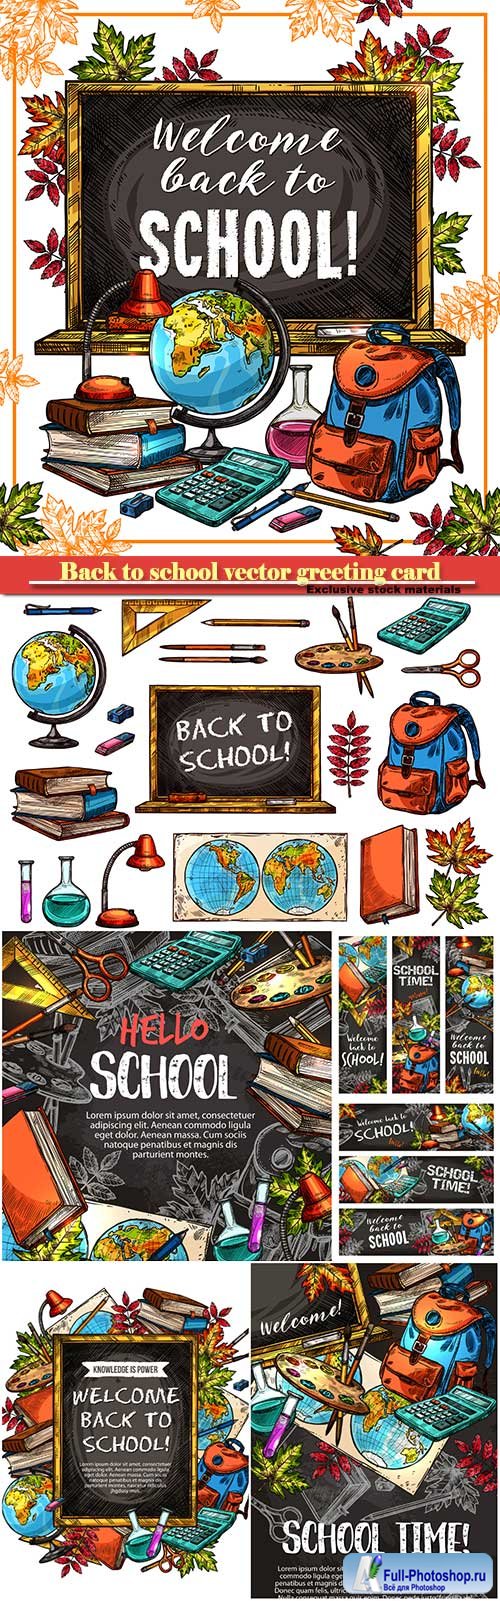 Back to school vector greeting card # 7